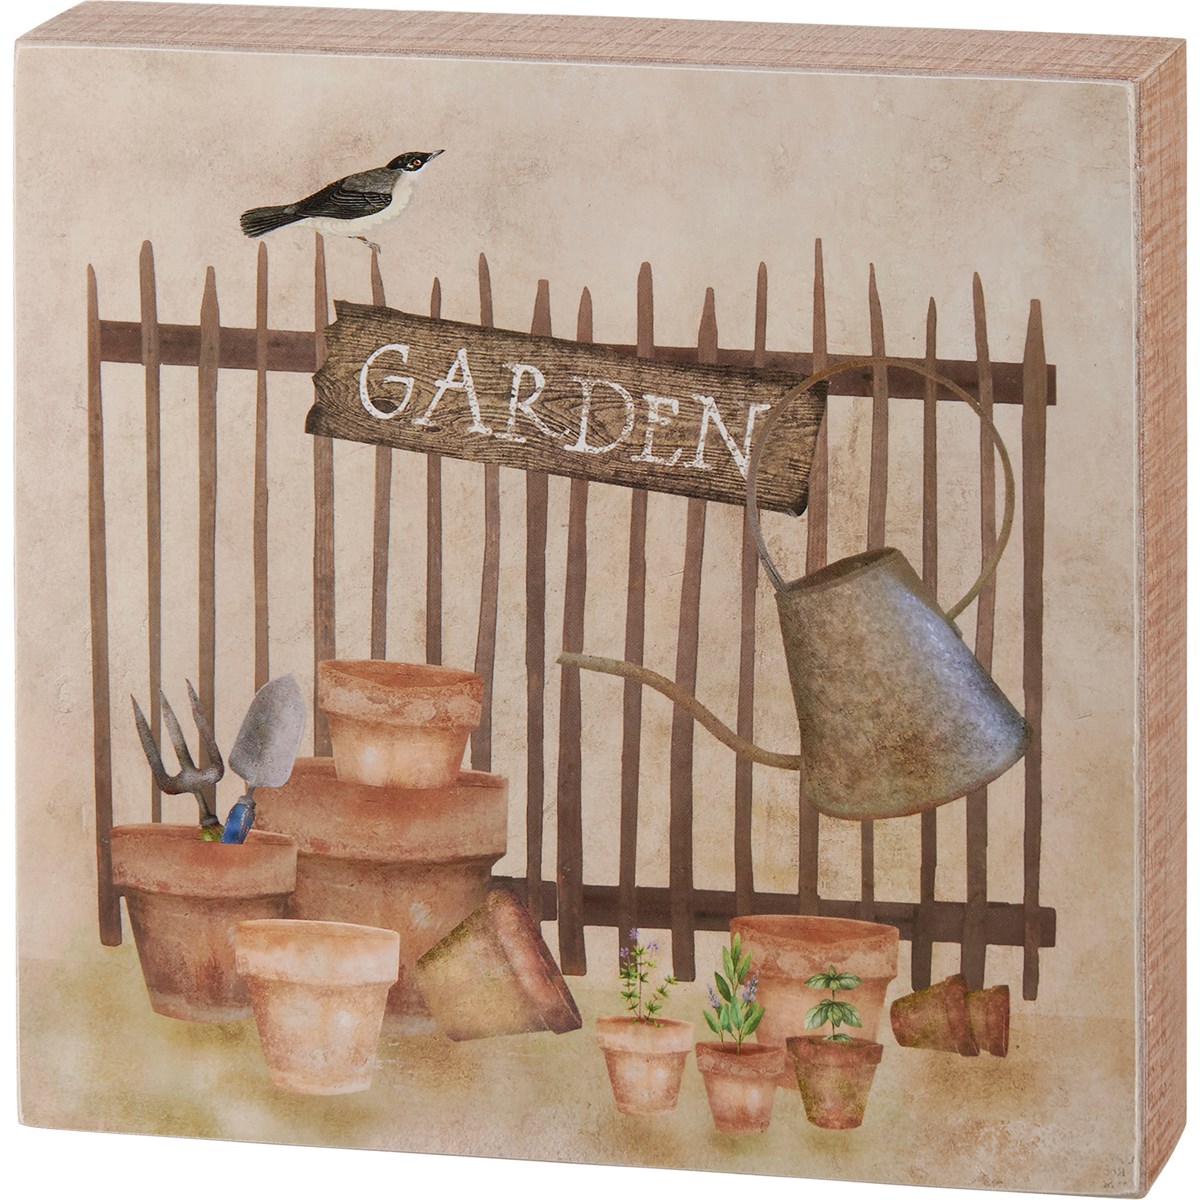 Garden Fence Box Sign - Wood, Paper